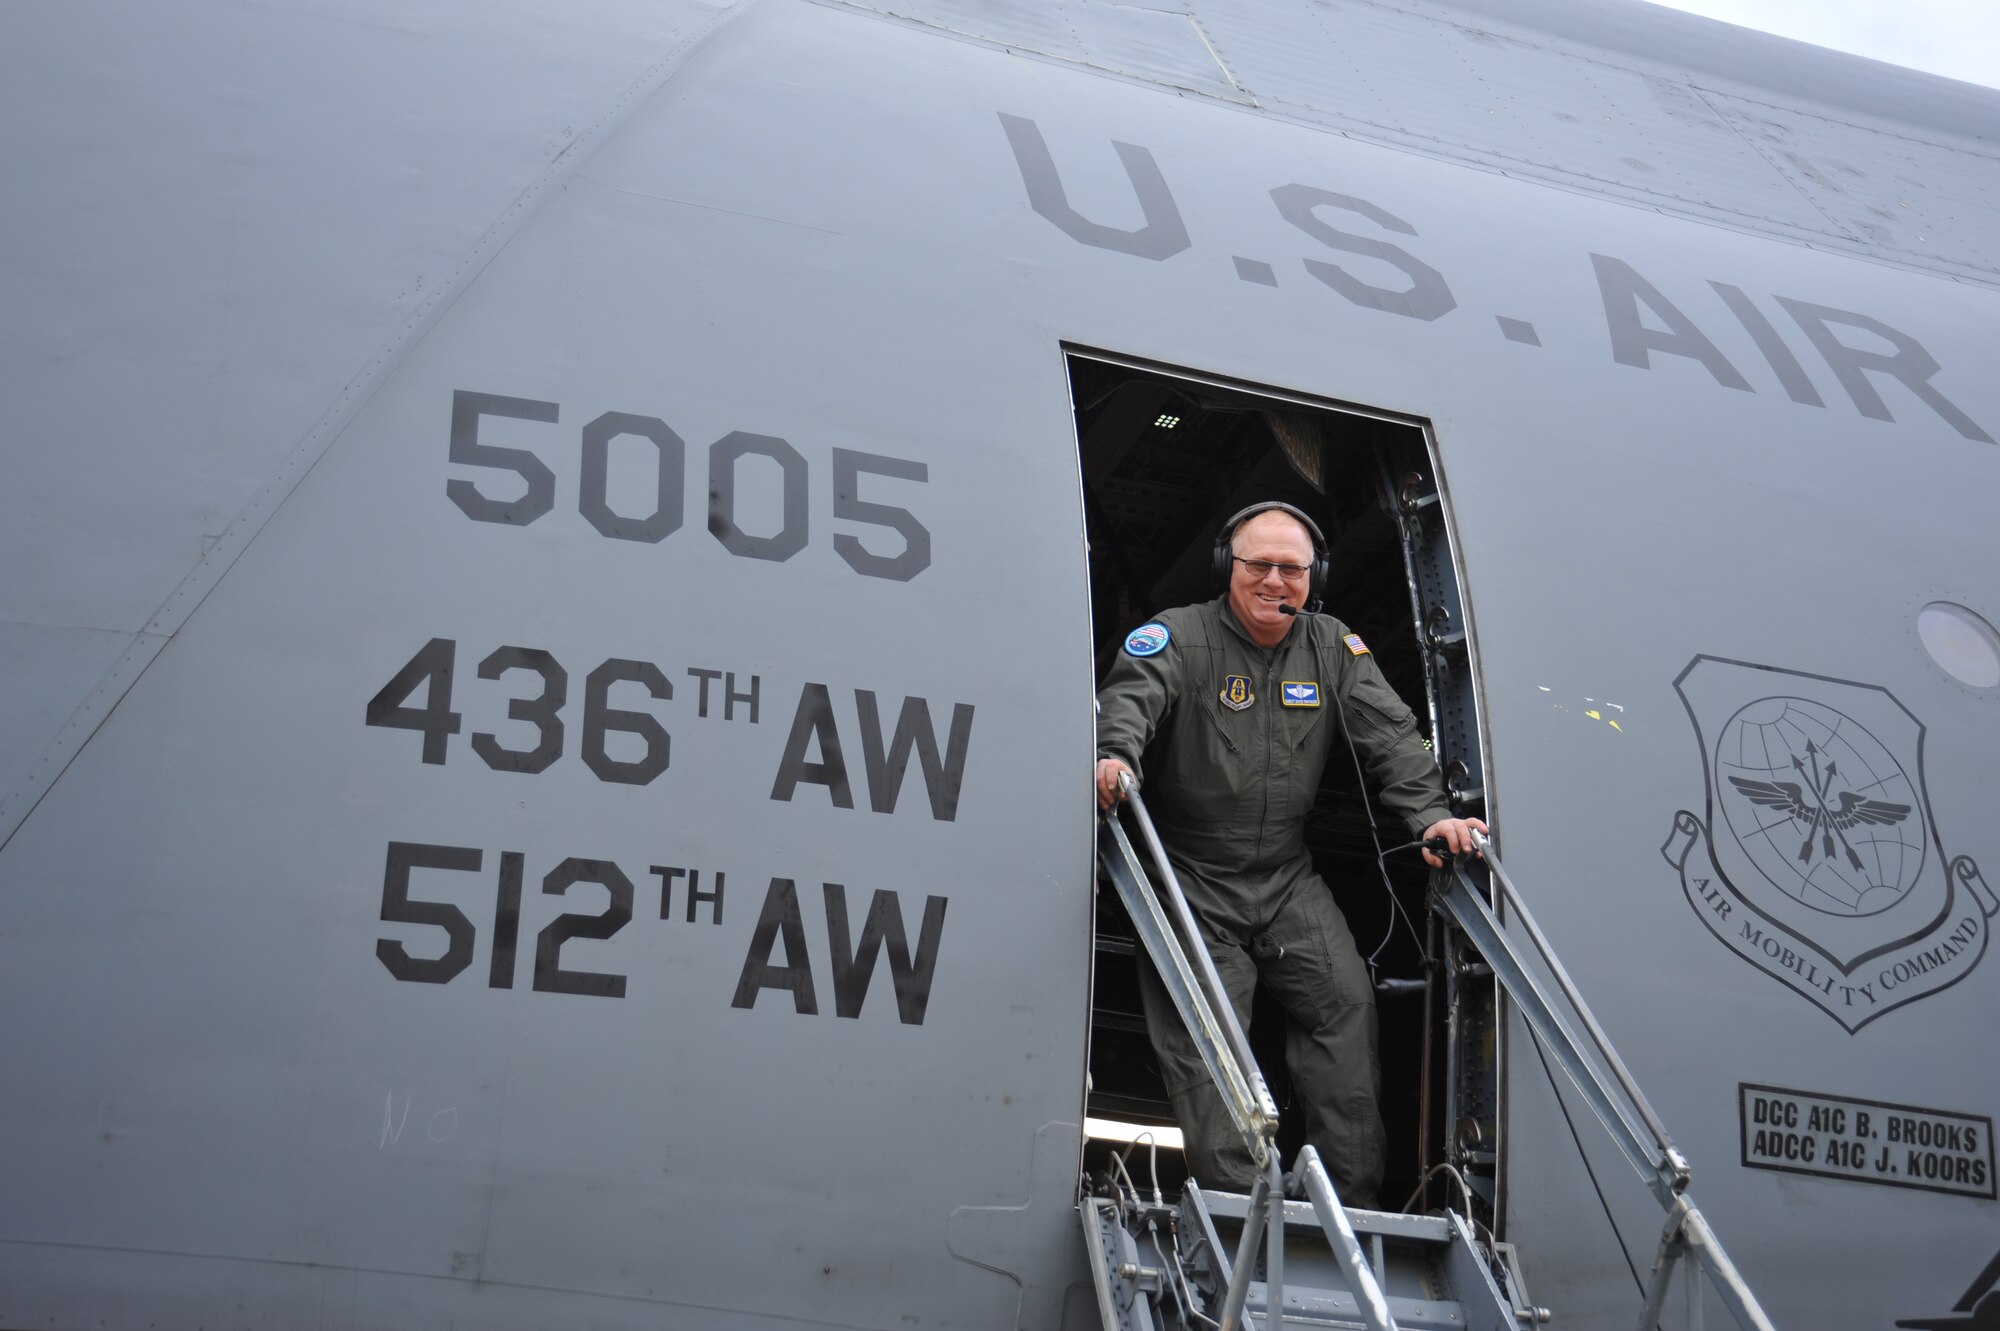 U.S. Air Force Senior Master Sgt. Dave Finfinger, 512th Operations Group loadmaster, prepares a C-5 Galaxy for the 2023 Australian International Airshow and Aerospace & Defence Exposition—AVALON 23—at Avalon International Airport, March 1, 2023. The Department of Defense supported AVALON 23 with approximately 300 personnel and a number of various aircraft to include the F-22 Raptor, KC-46 Pegasus, C-17 Globemaster III, AH-64 Apache, M142 HIMARS among many others. The C-5 Galaxy is a strategic transport aircraft and is the largest aircraft in the U.S. Air Force inventory. (U.S. Air Force photo by 1st Lt. Alyssa Letts)